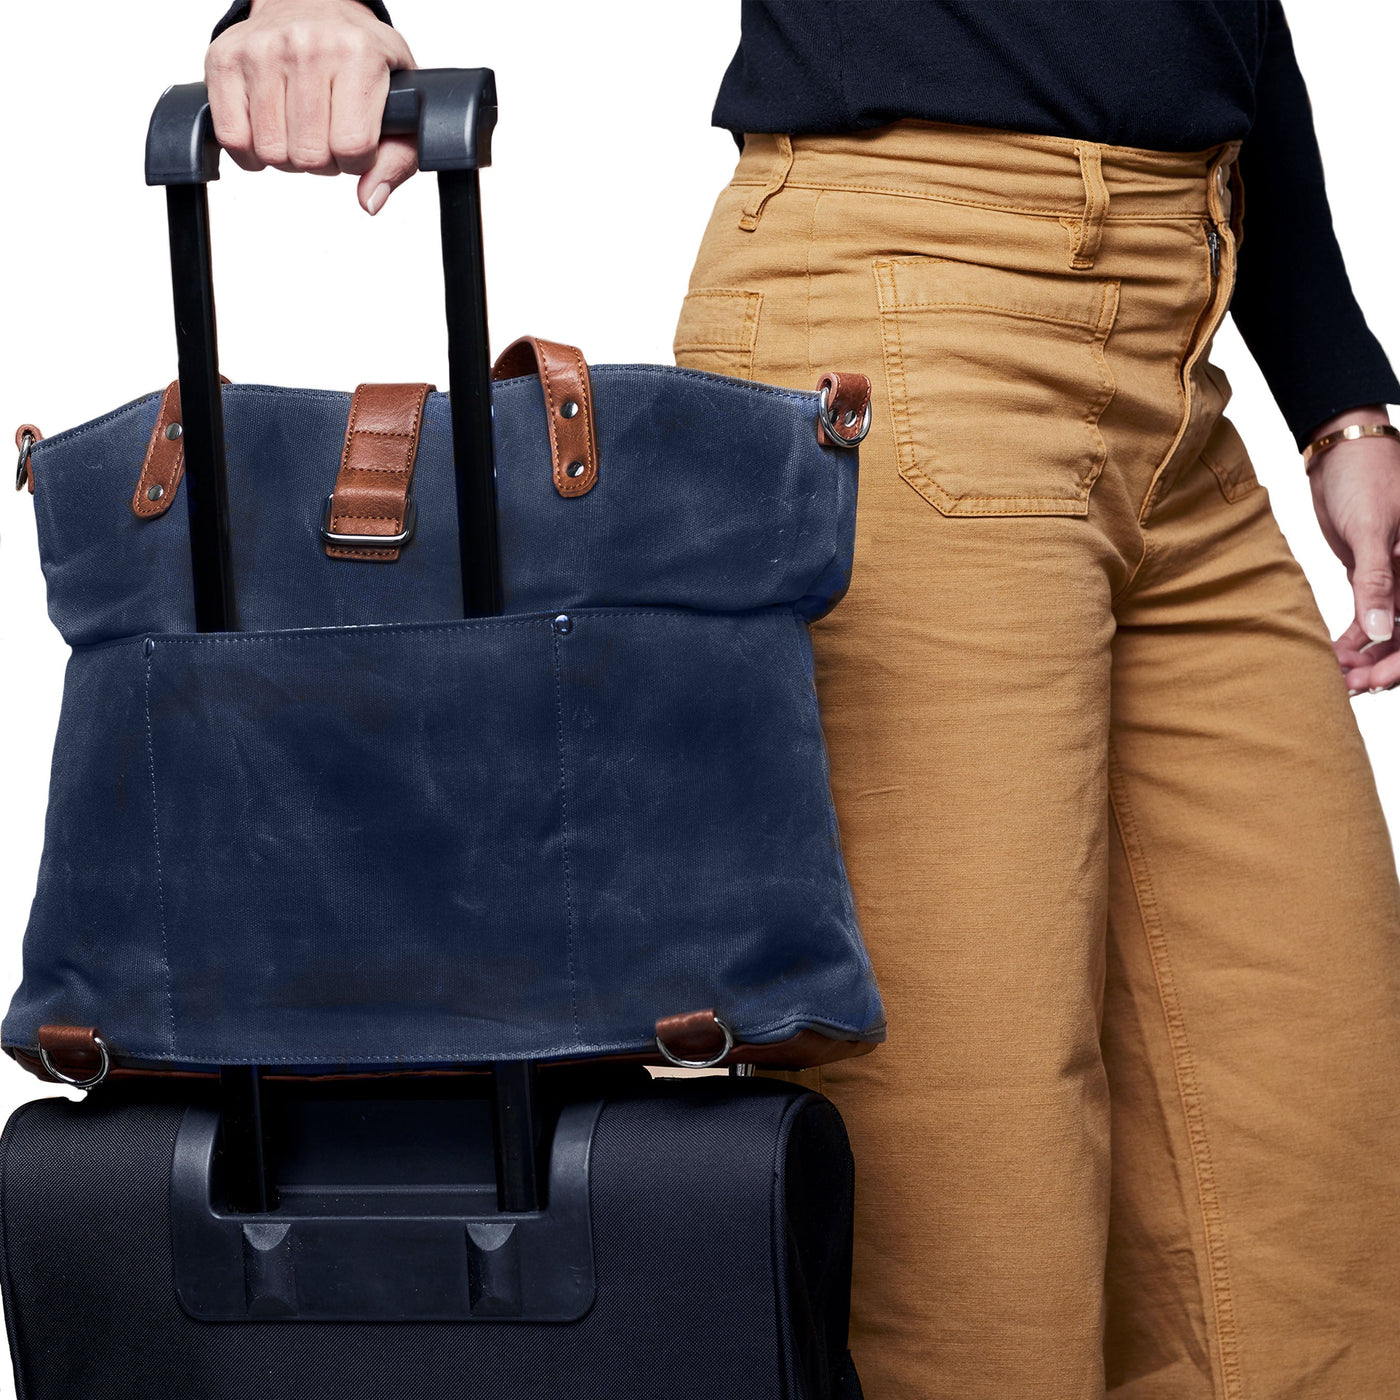 Navy blue waxed canvas tote bag mounted on luggage handle of black rolling bag using sleeve pocket, with mom pulling.